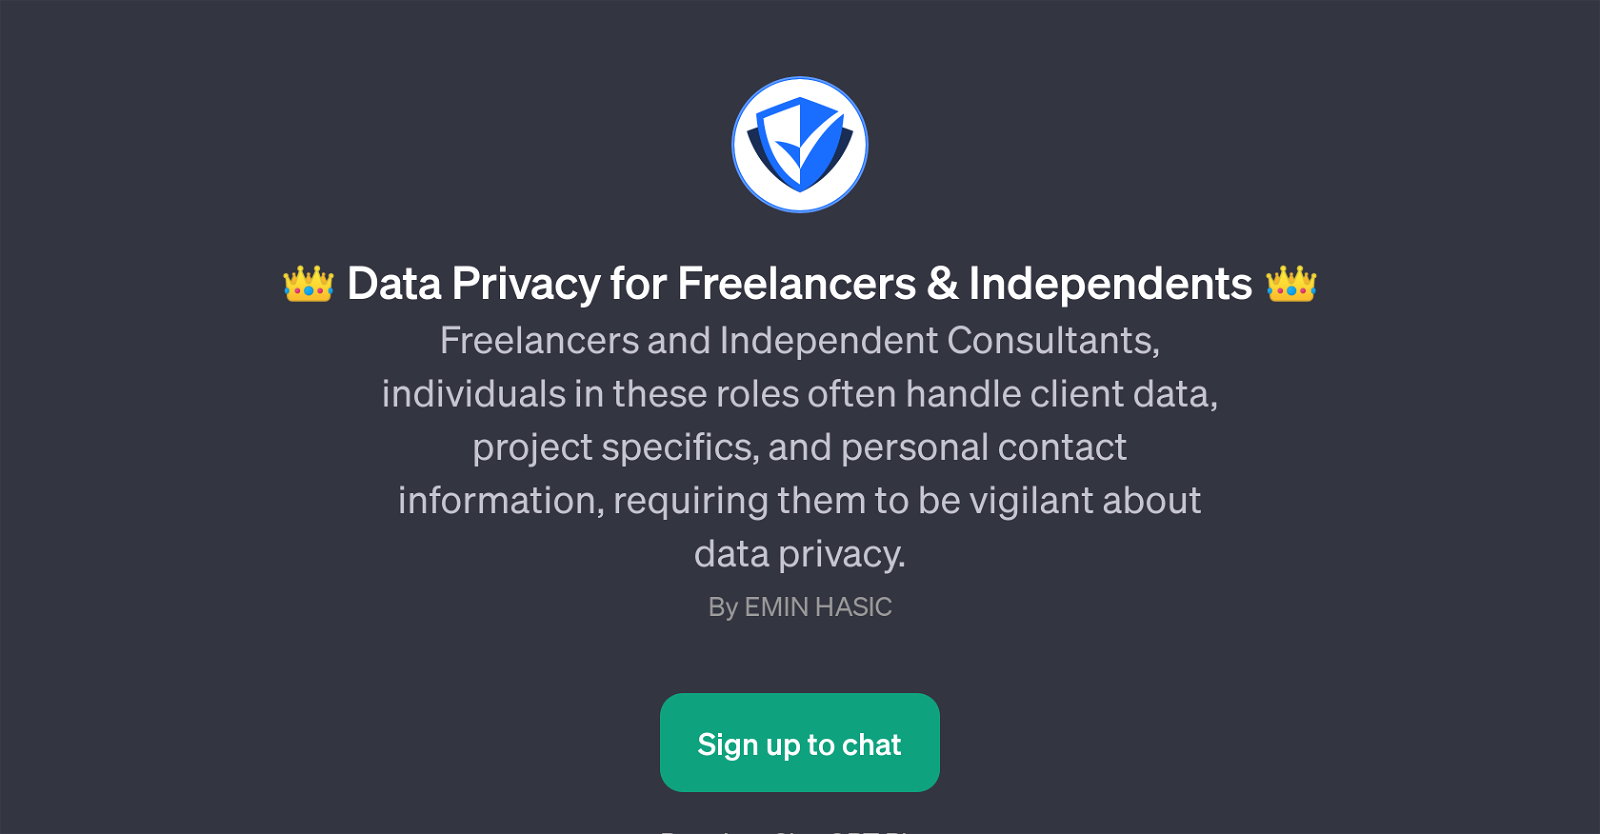 Data Privacy for Freelancers & Independents website